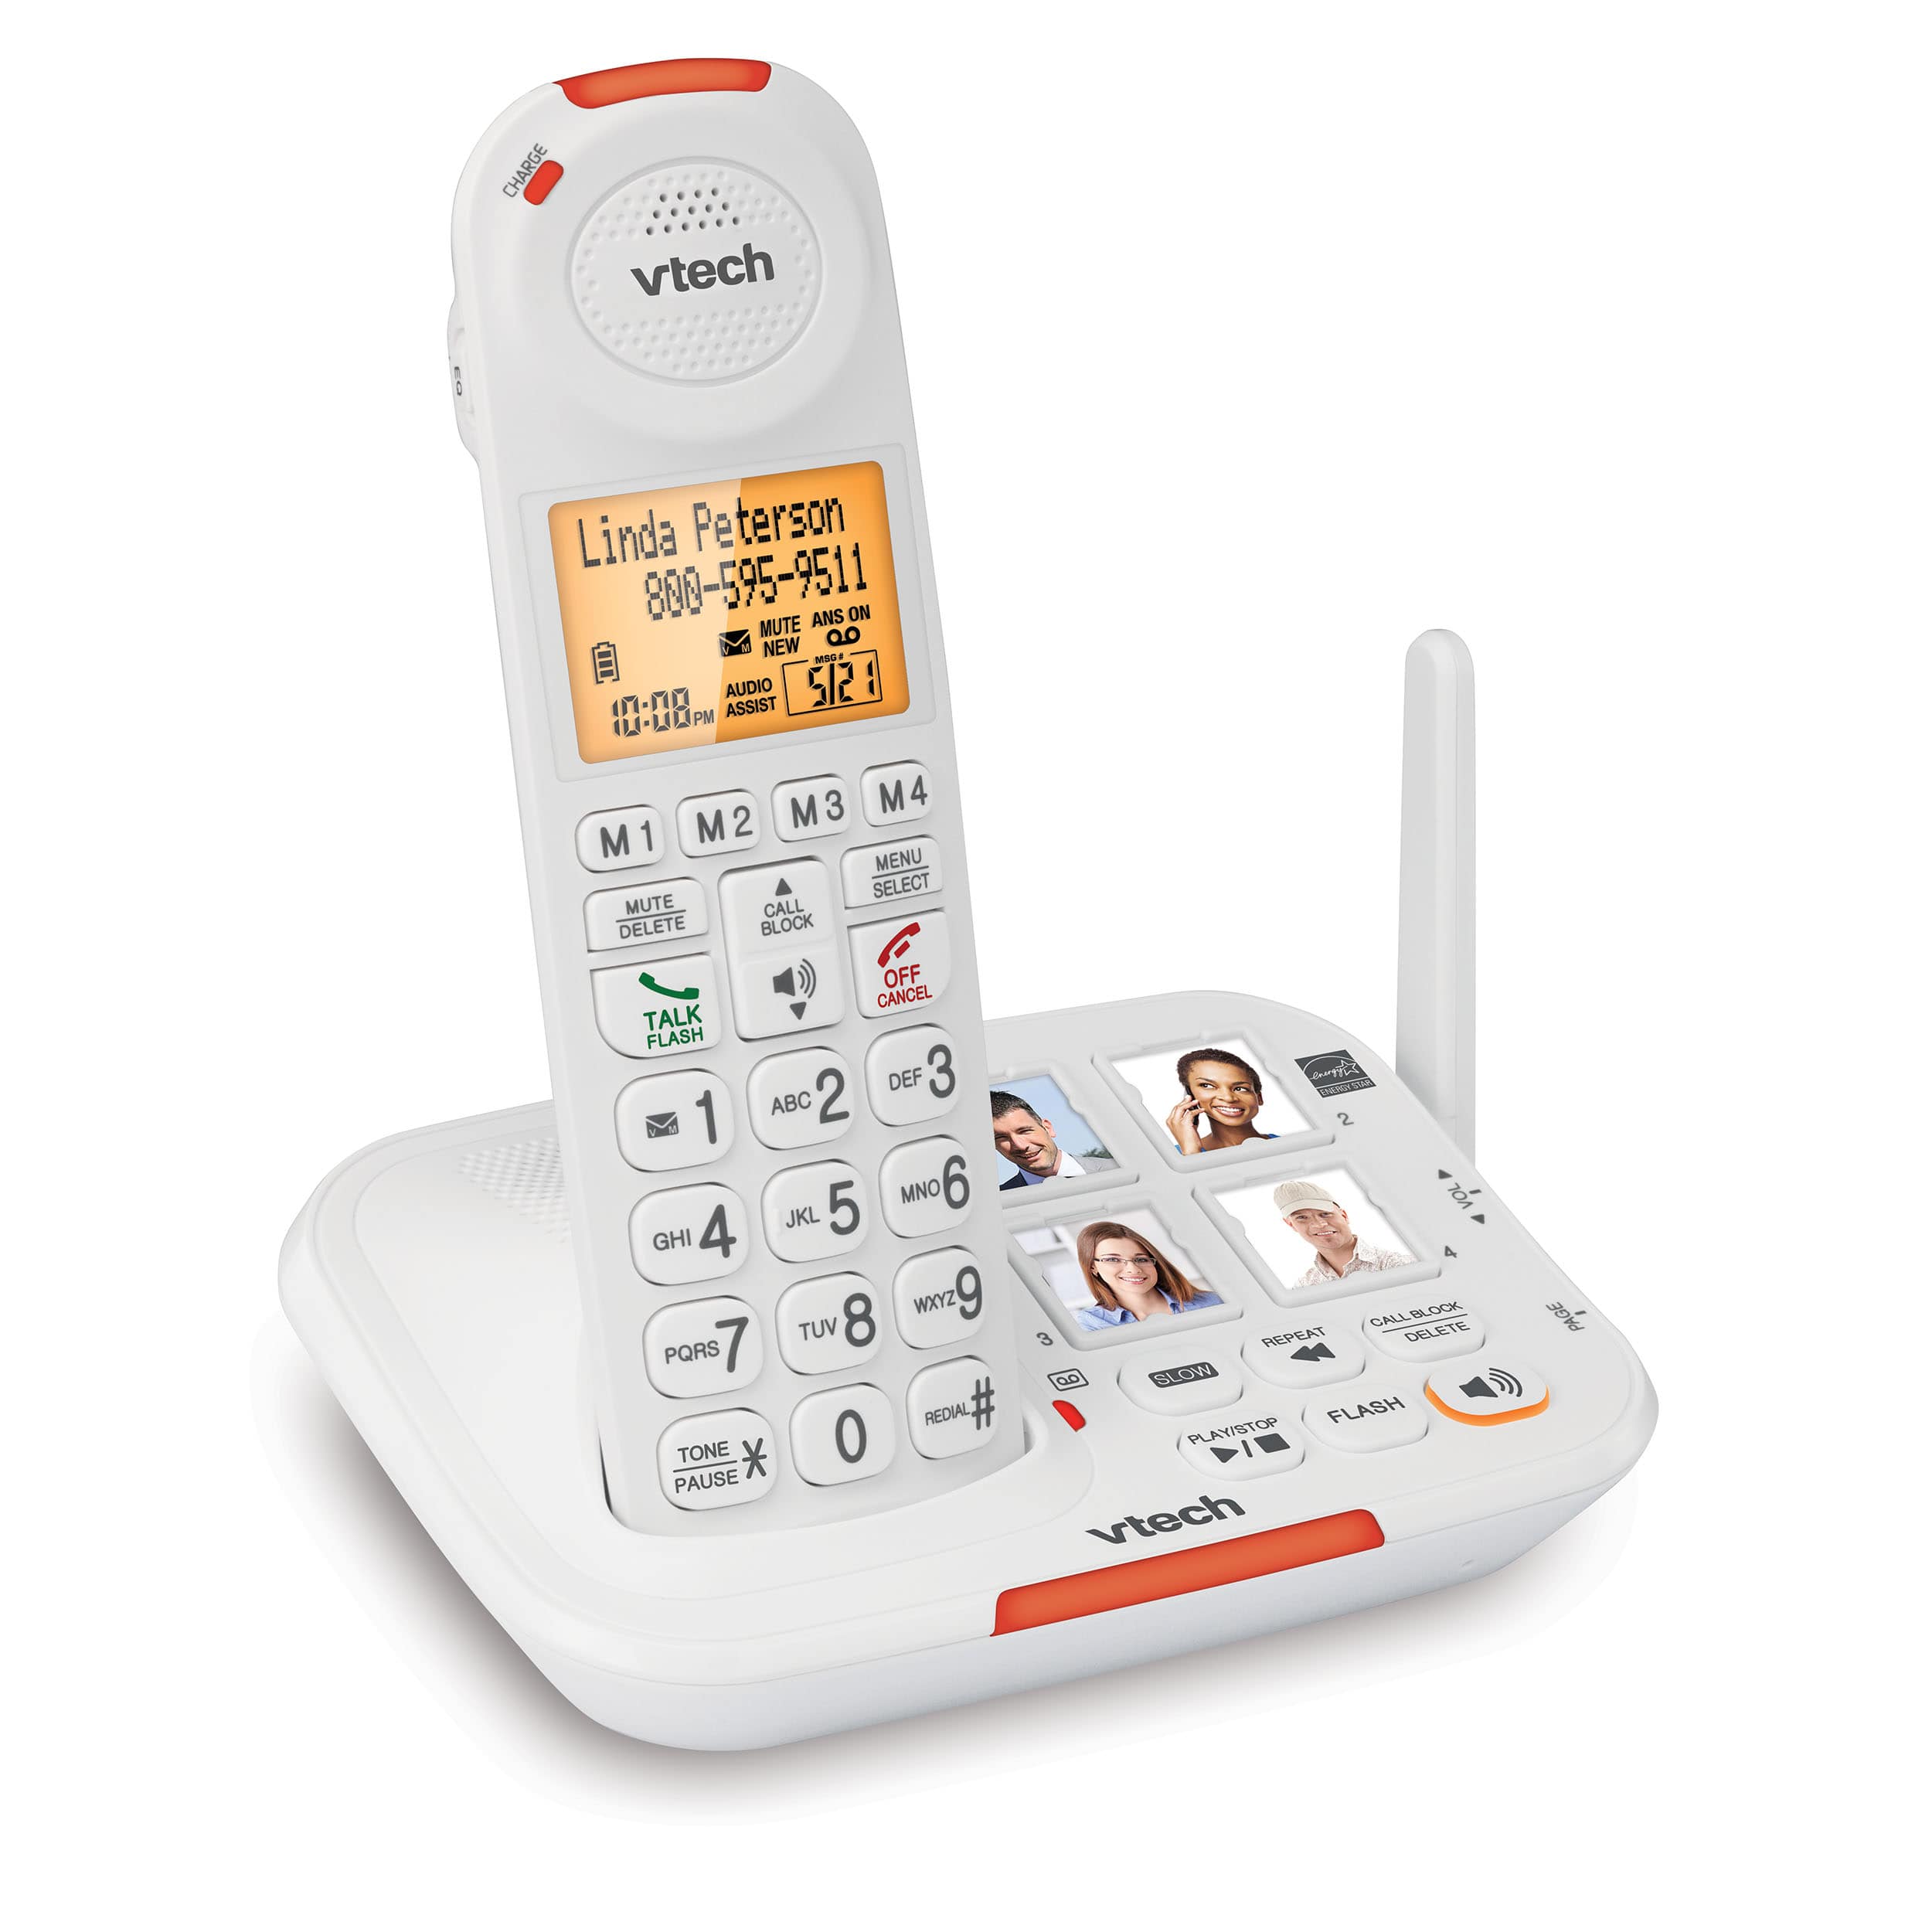 4 Handset Amplified Cordless Answering System with Big Buttons and Display - view 3